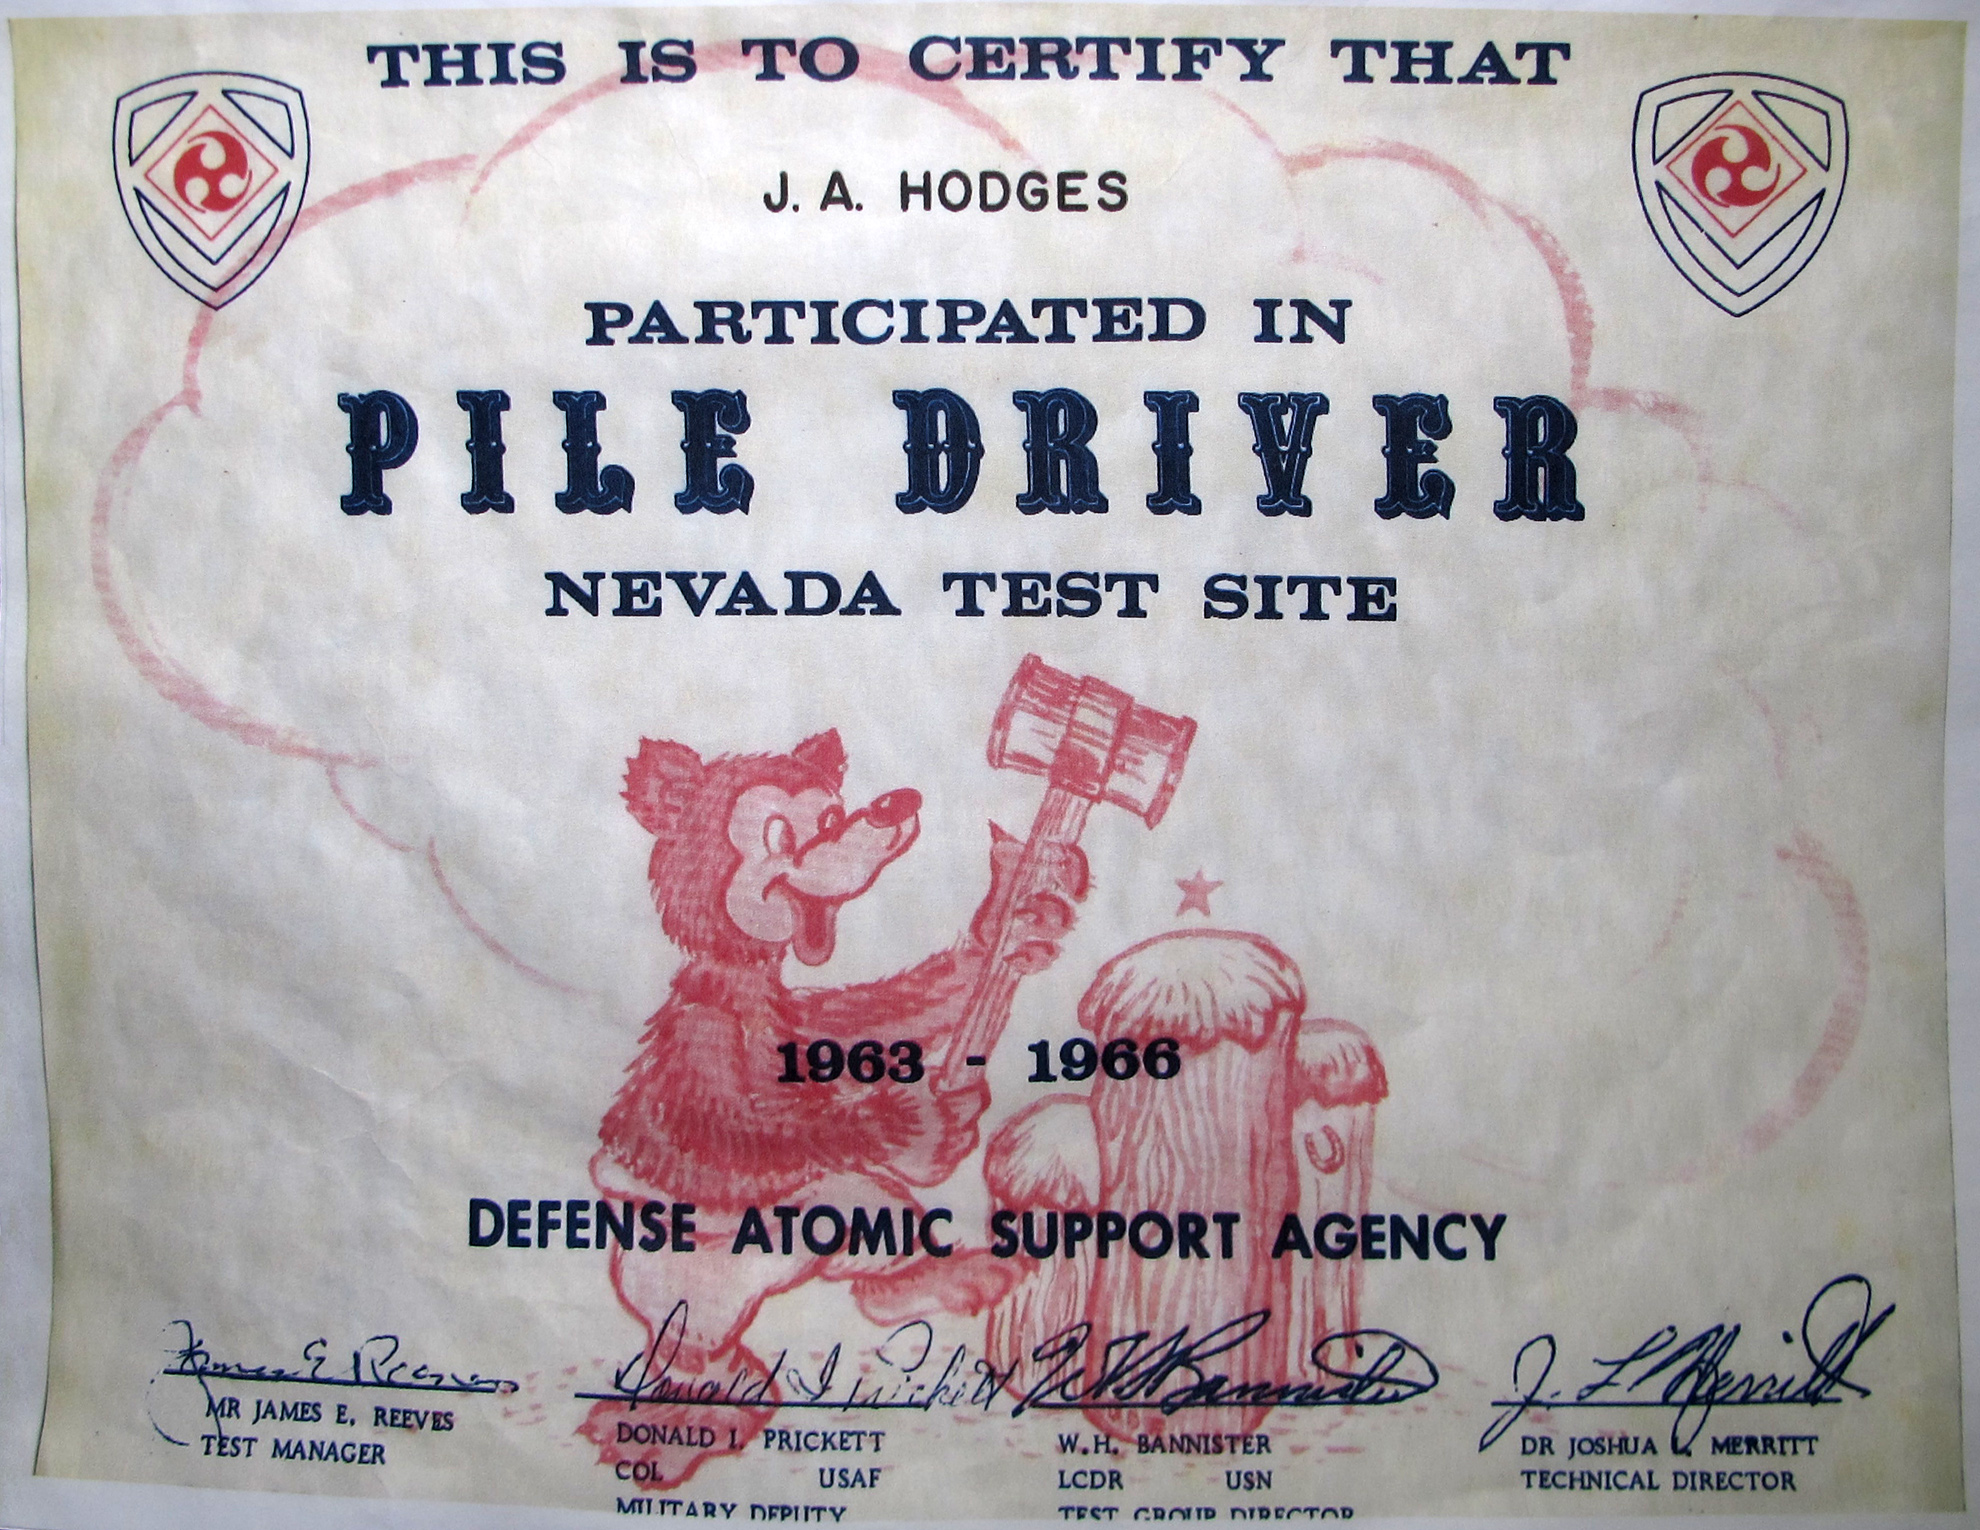 America Used To Give Out Weird Participation Awards For Nuclear Tests